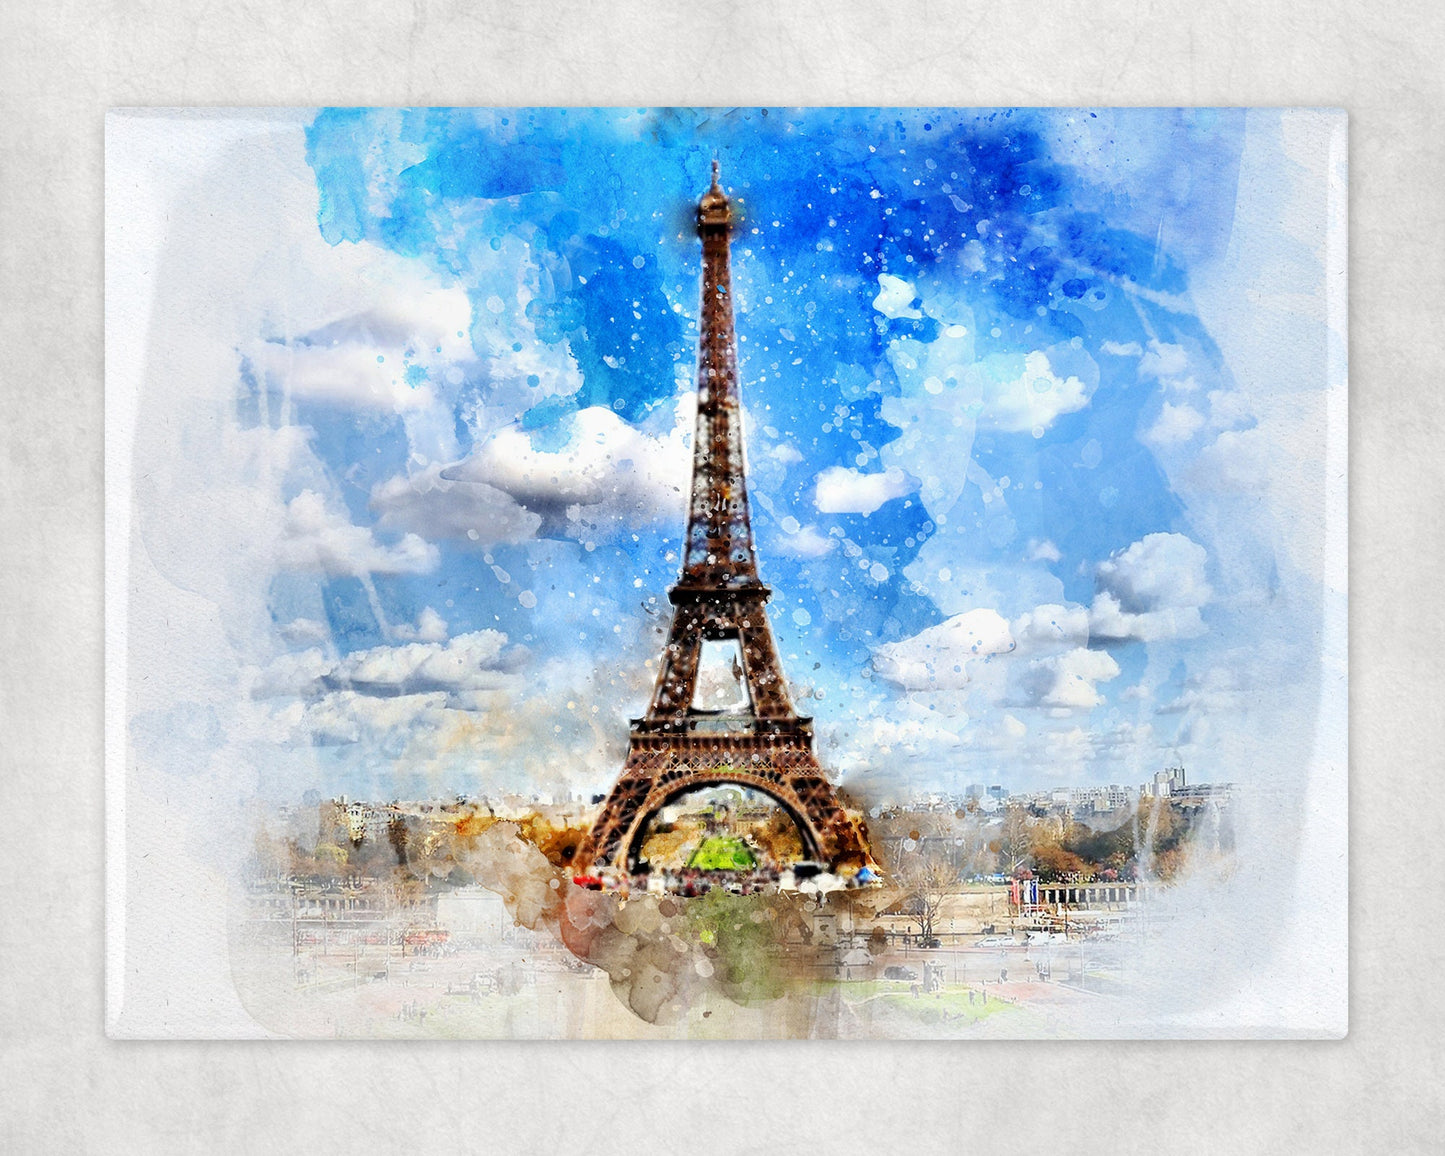 Watercolor Style Paris Eiffel Tower Art Decorative Ceramic Tile with Optional Easel Back - 6x8 inches